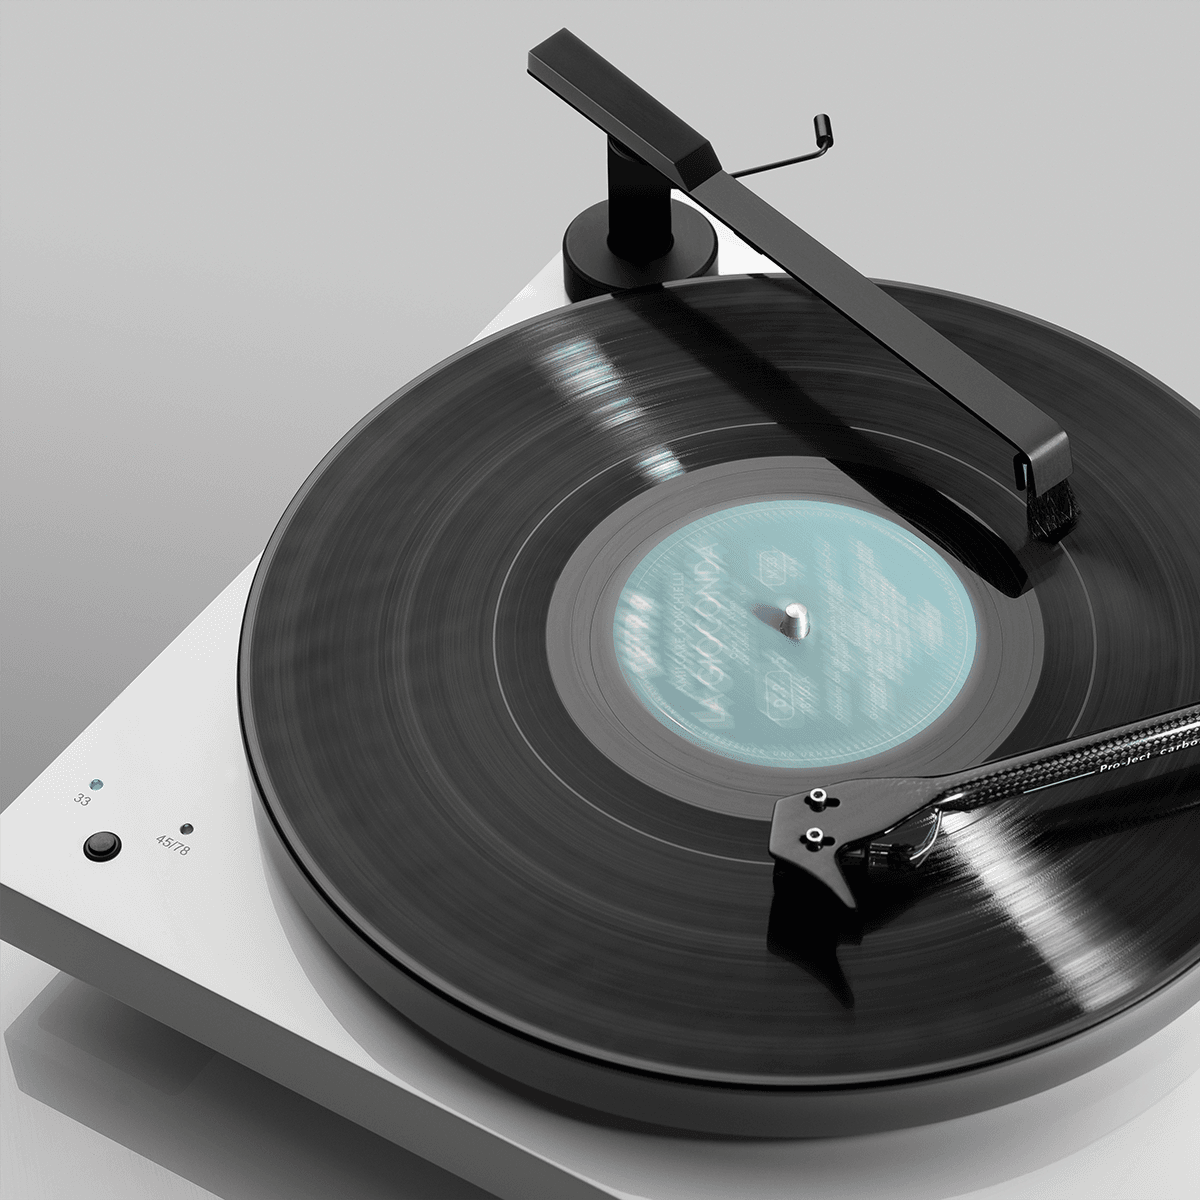 Pro-Ject Sweep It S2 Record Brush, Black, set up on a Pro-Ject Debut Carbon turntable